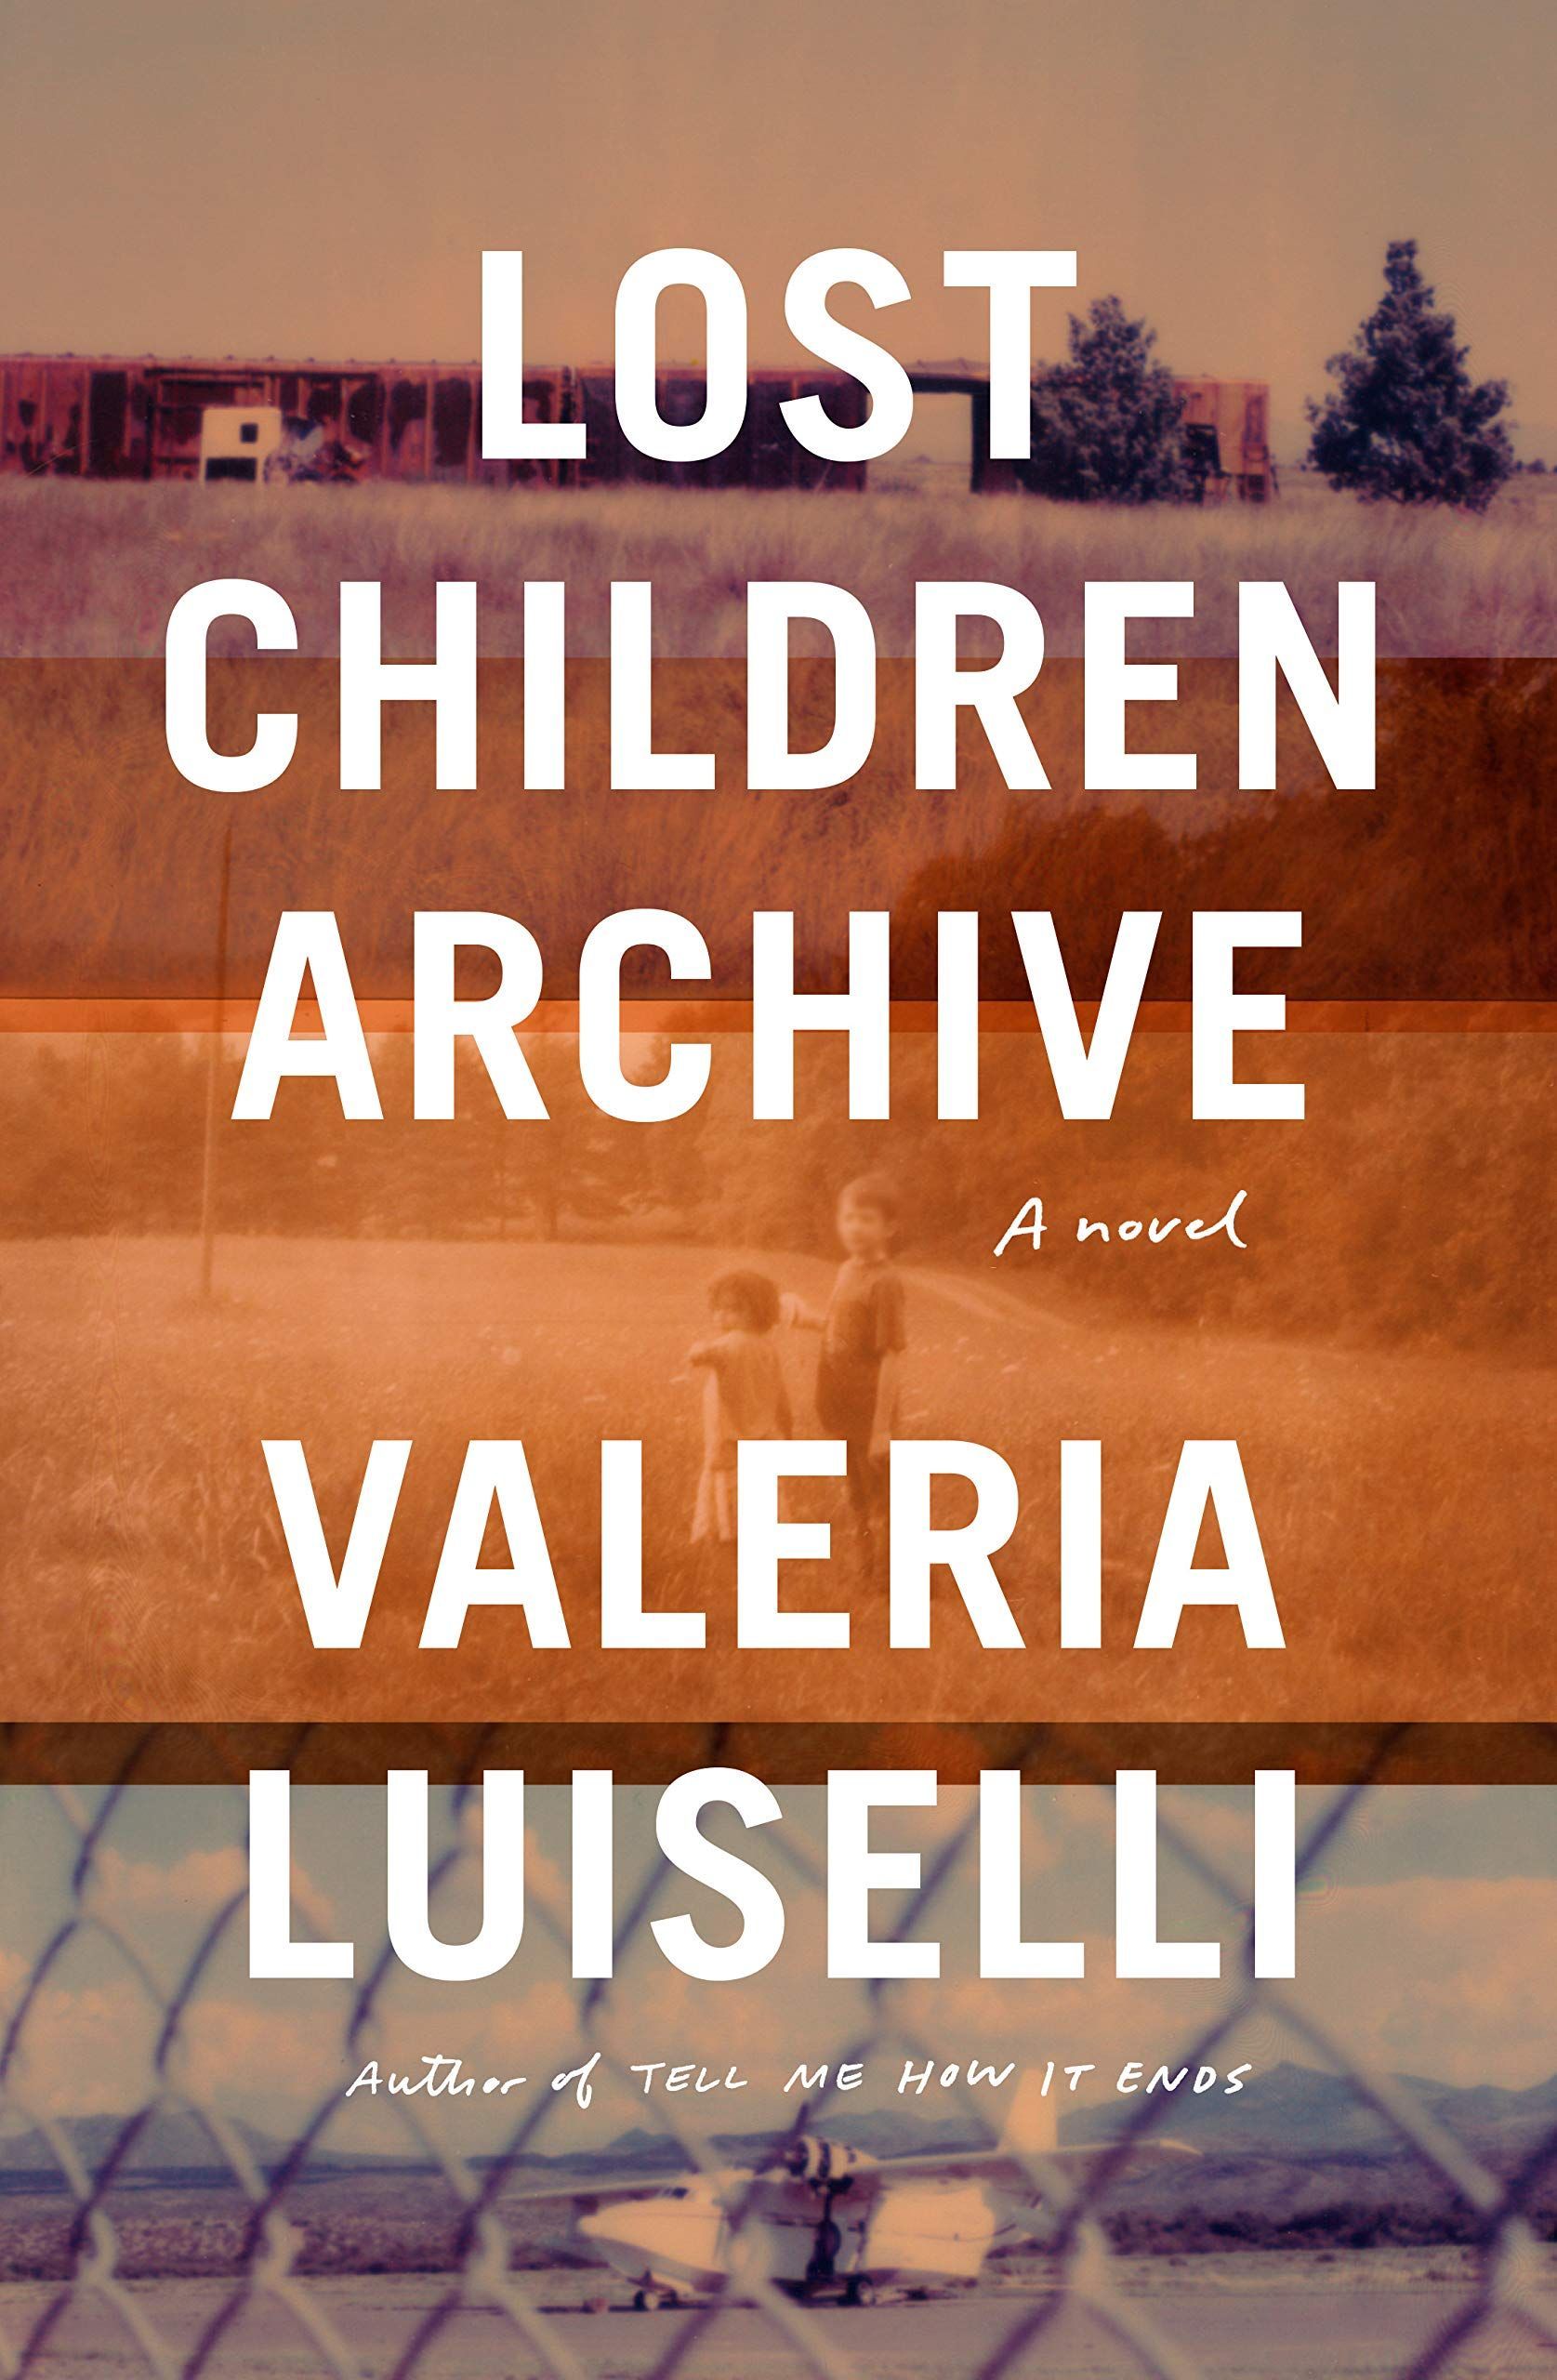 The Sounds of Exile: On Valeria Luiselli’s “Lost Children Archive”